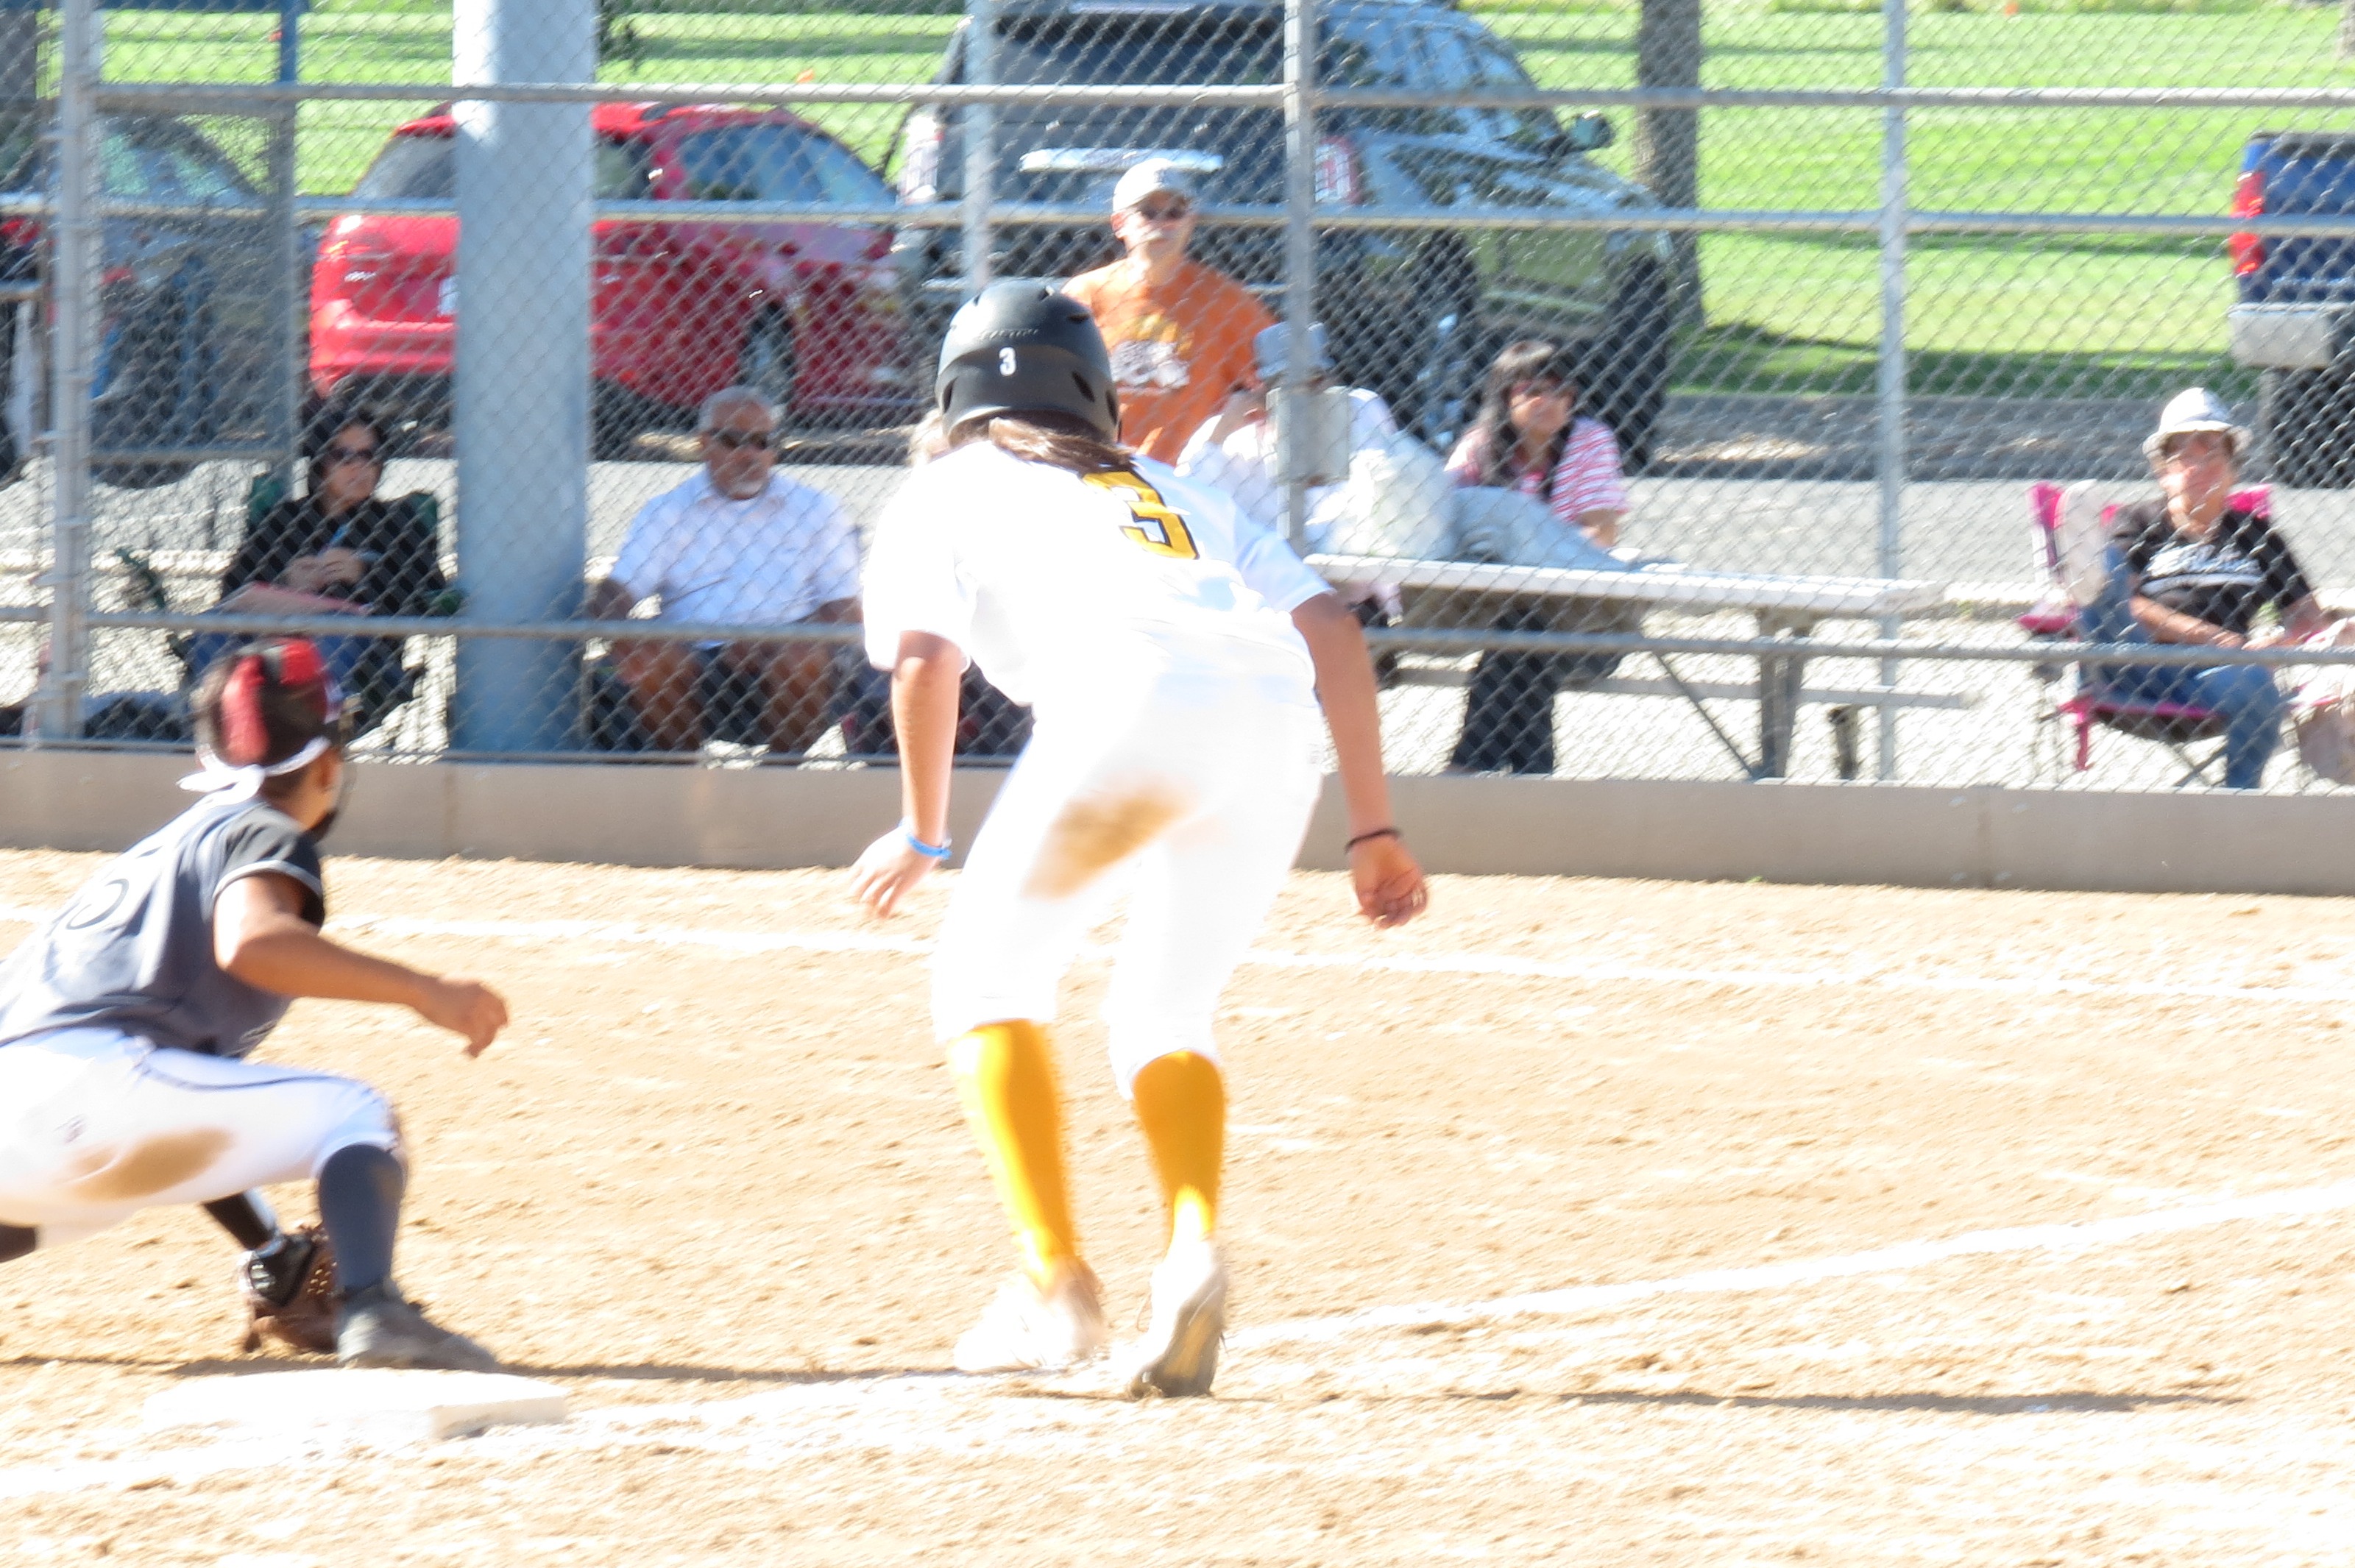 Check out the photos and videos of the softball recruiting profile Iliana Munoz